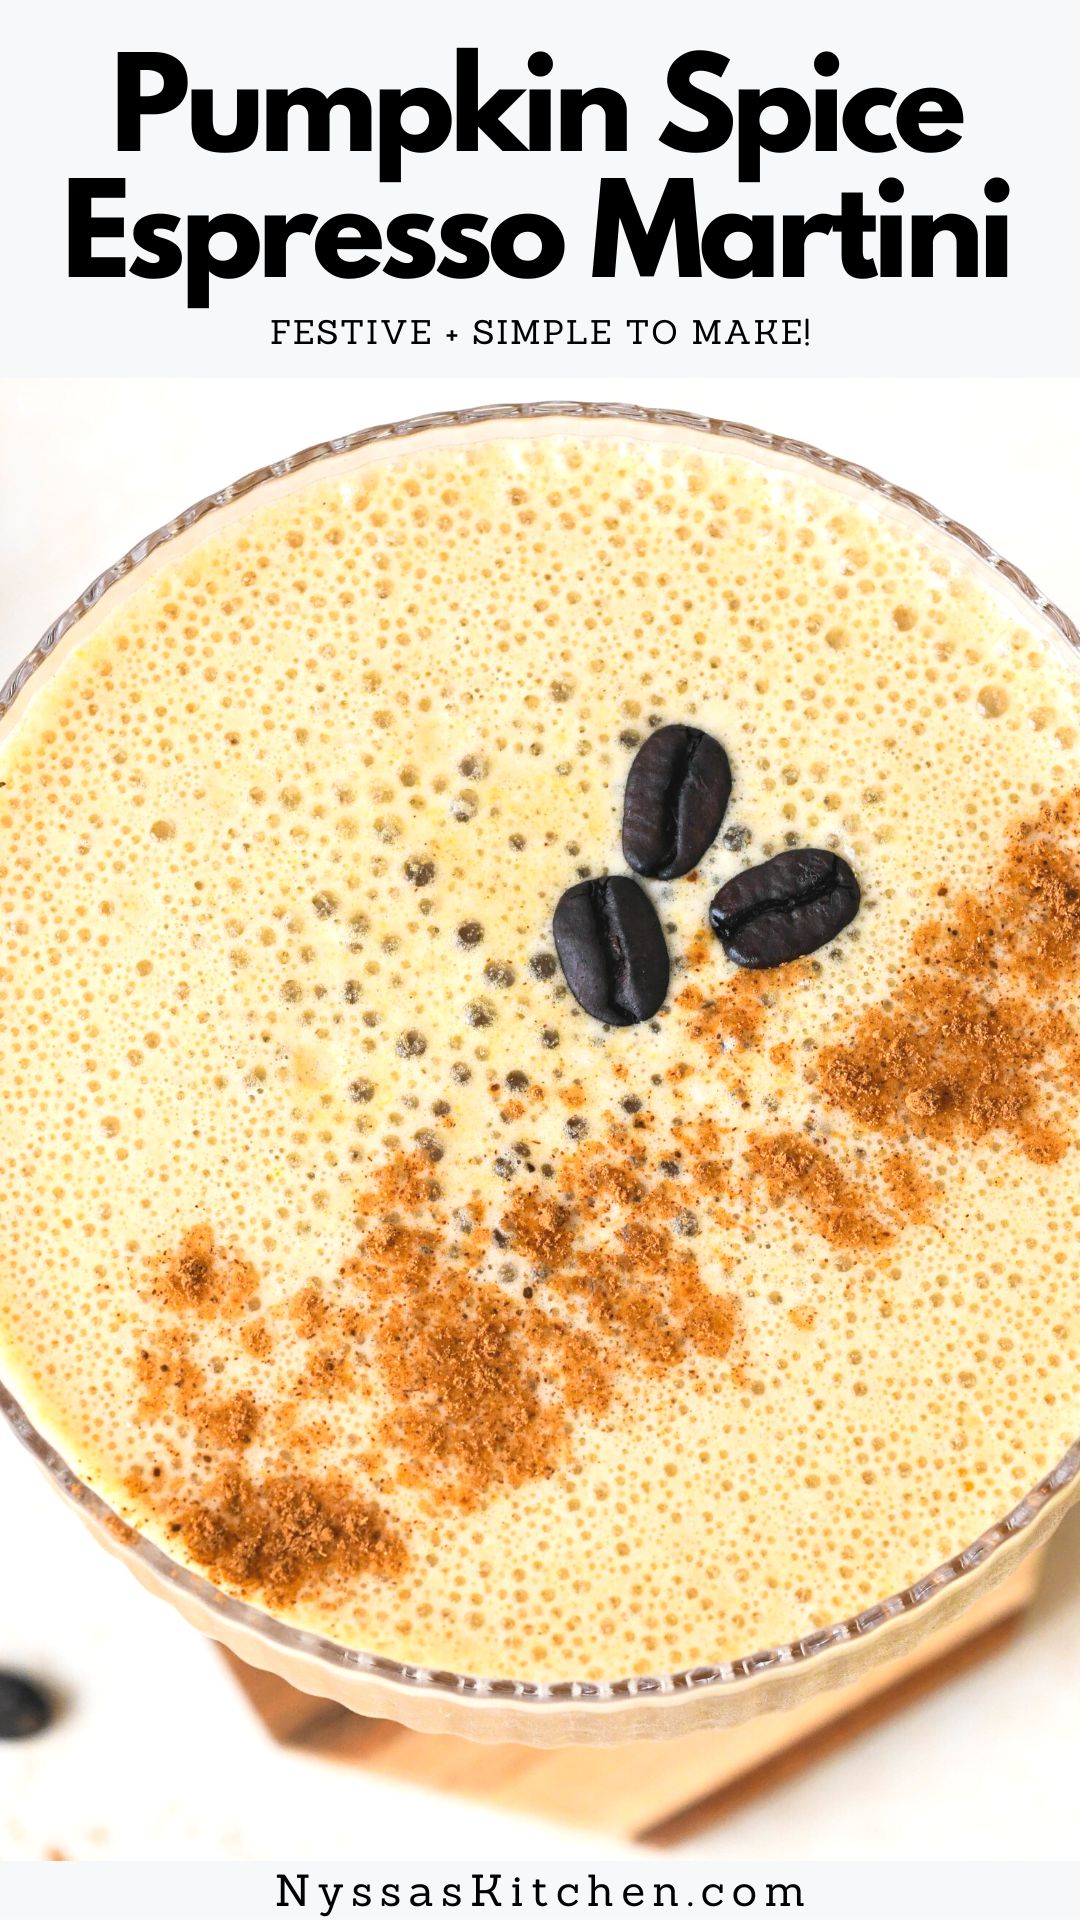 This pumpkin spice espresso martini recipe is a delightful fall inspired twist on a classic cocktail that we all know and love. Made with vodka, coffee liqueur, cold brew or espresso, REAL pumpkin, and pumpkin pie spice. The perfect creamy pumpkin spice cocktail to enjoy all fall long! Easily made dairy free by opting for a dairy free creamer.